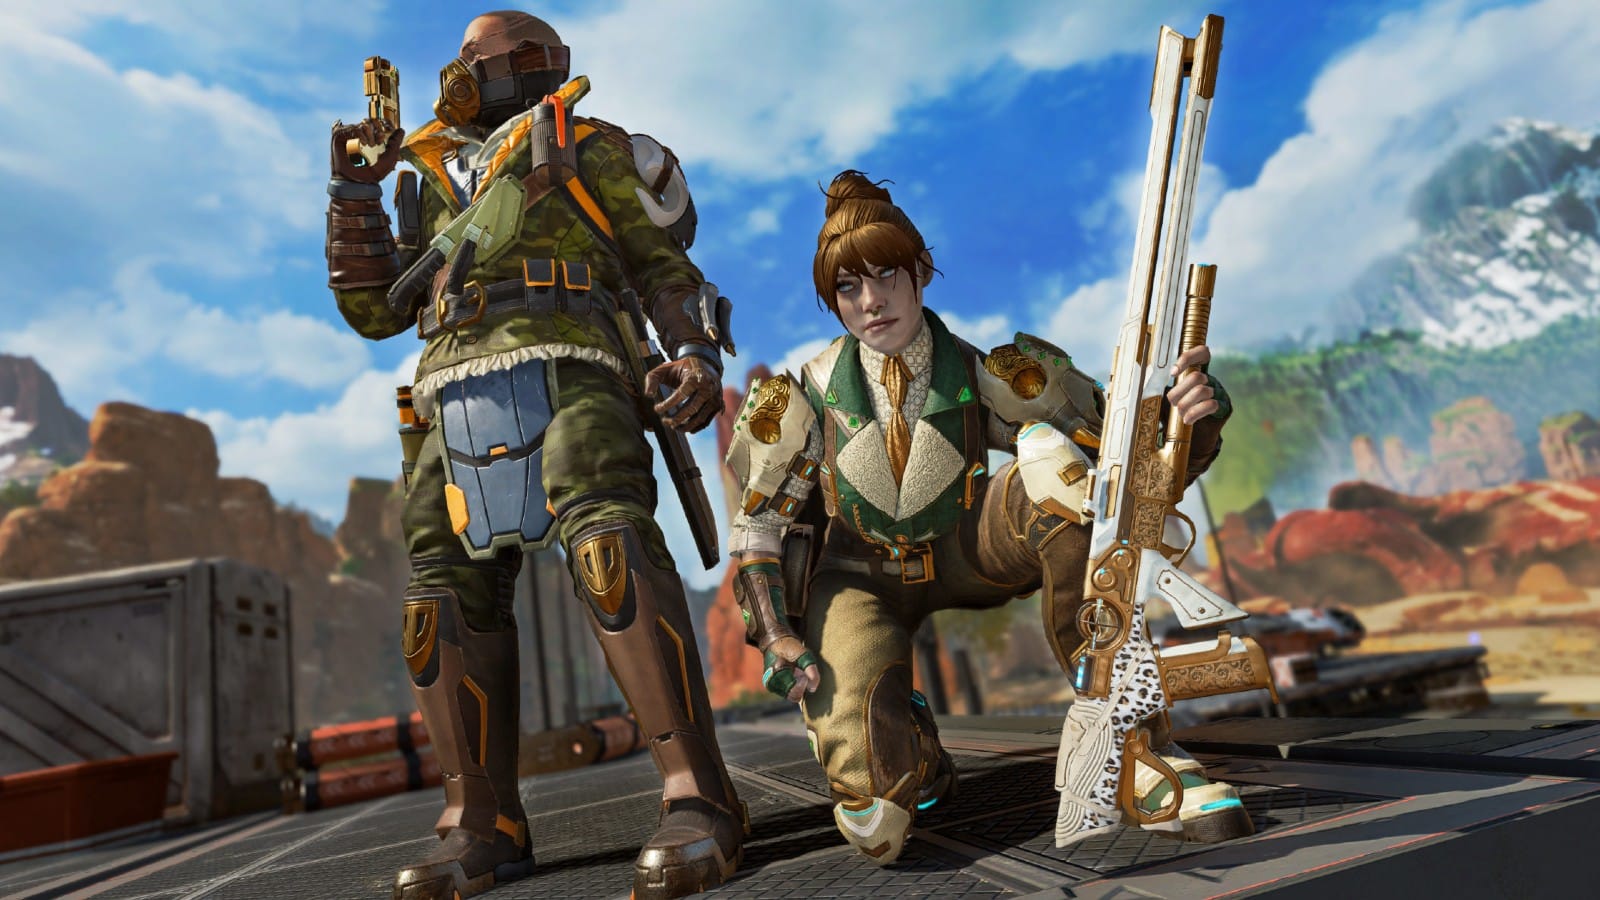 Apex Legends players want Fortnite-style change to Battle Pass